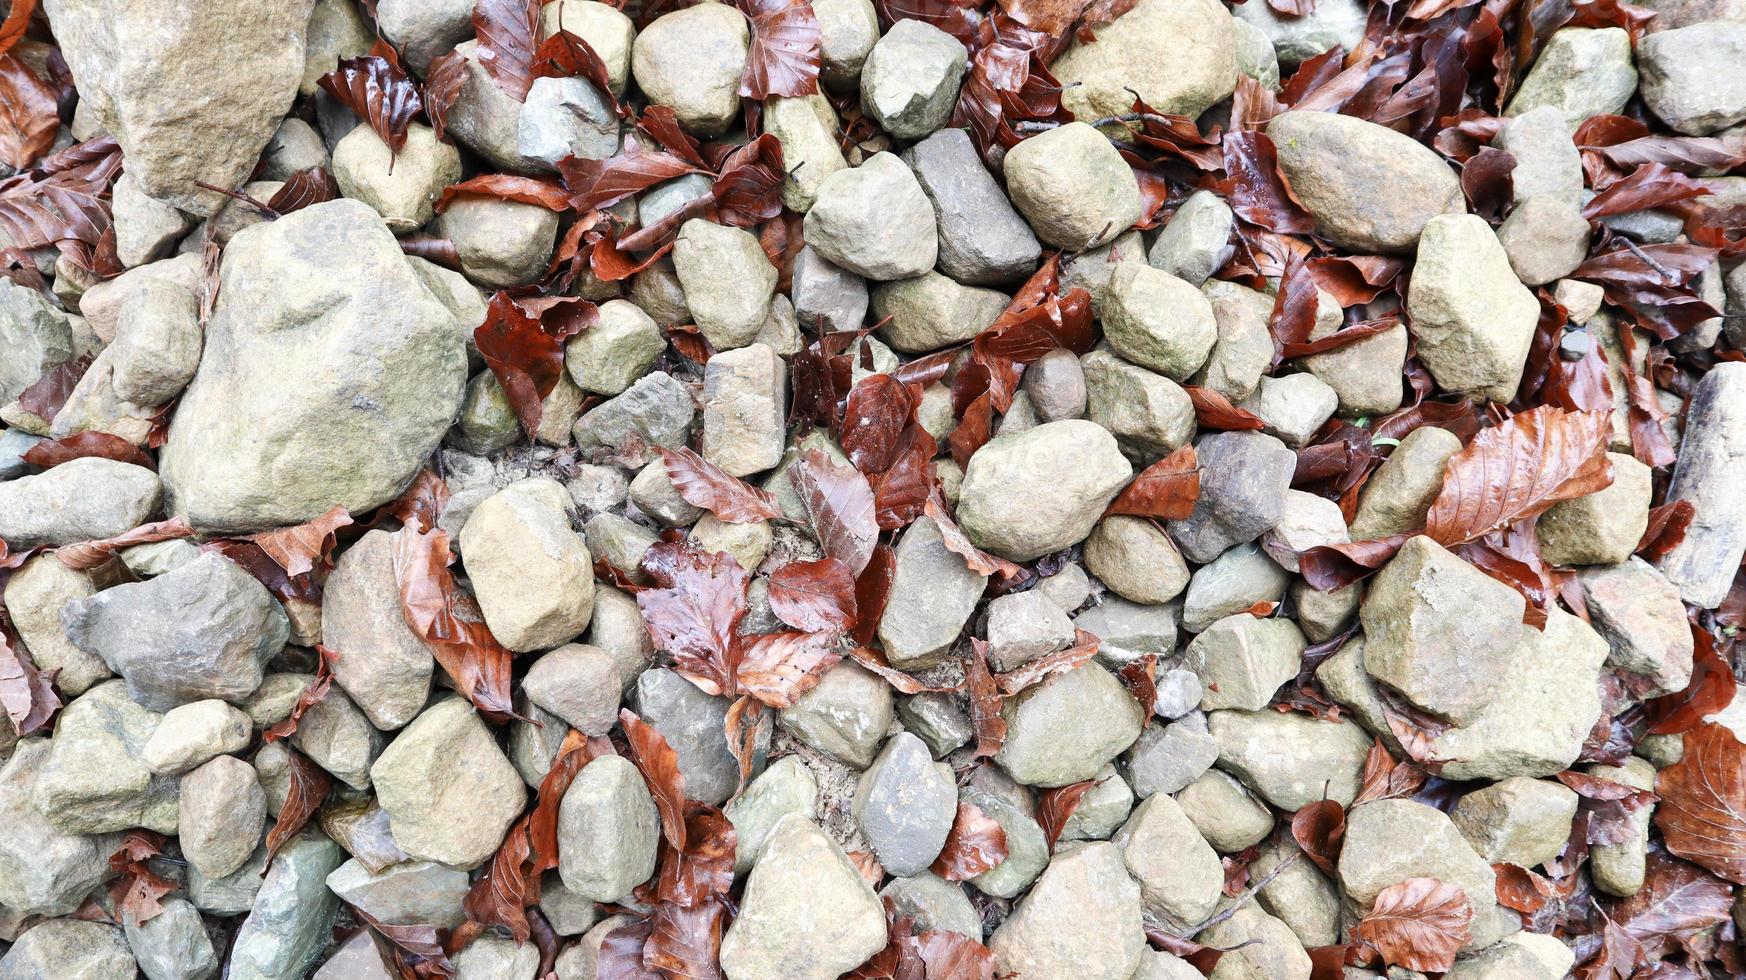 gray rounded stones with fallen leaves close-up. Close-up Colorful stones on the ground with Dry leaf and some Wool. Pattern Stone. Natural stone on floor. photo